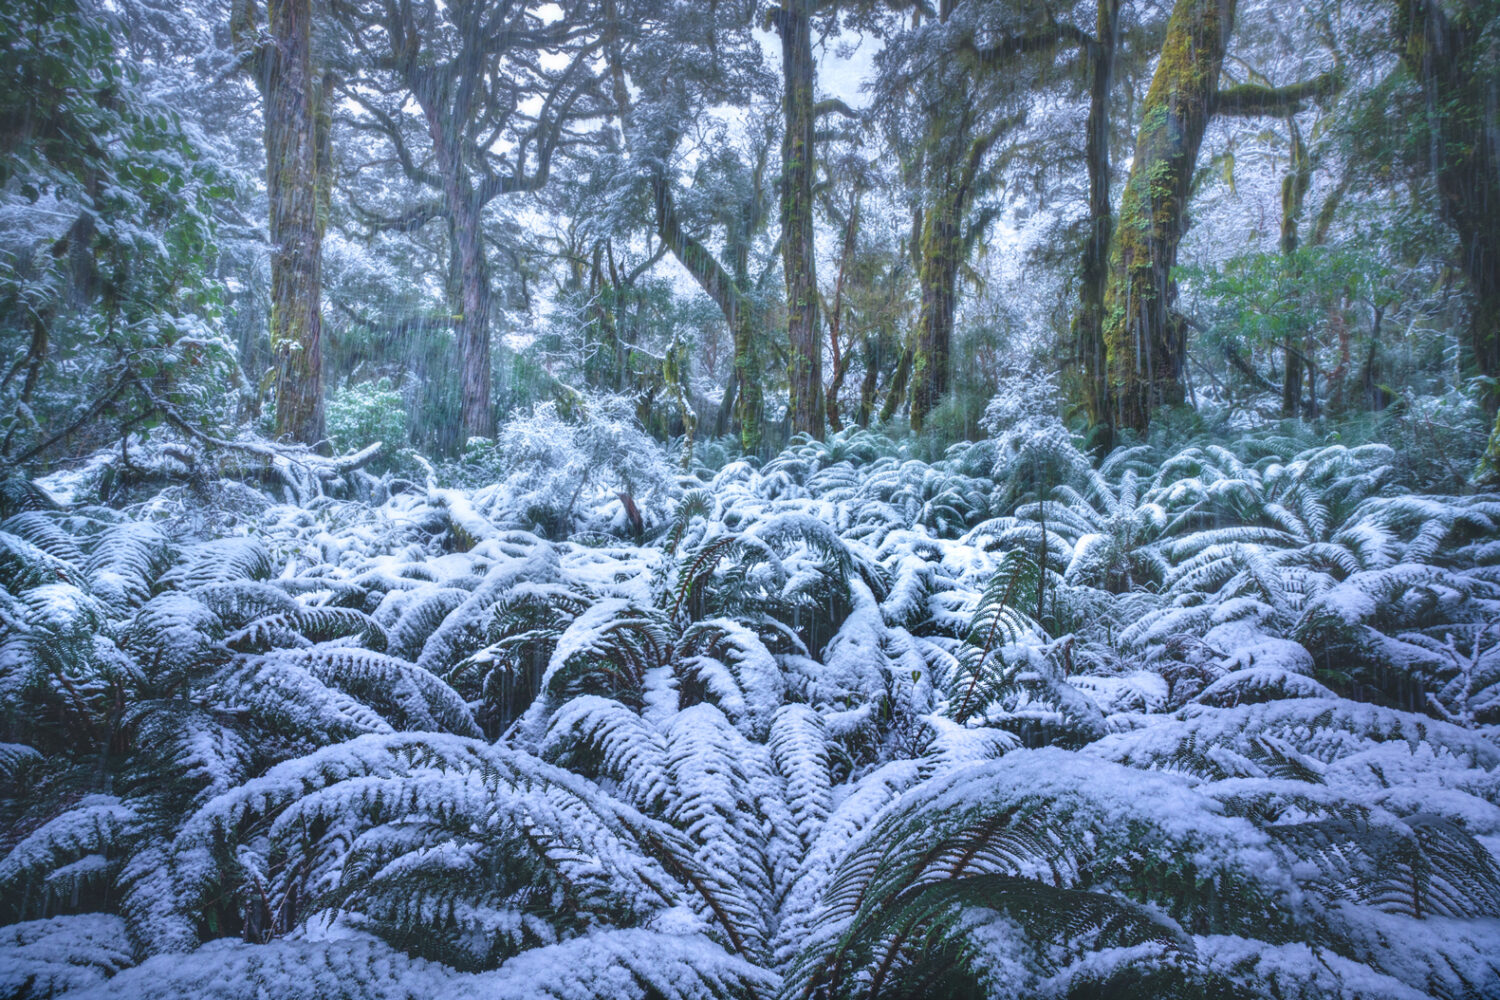 Snow covered beech forest in Fiordland, New Zealand. Photography by William Patino.